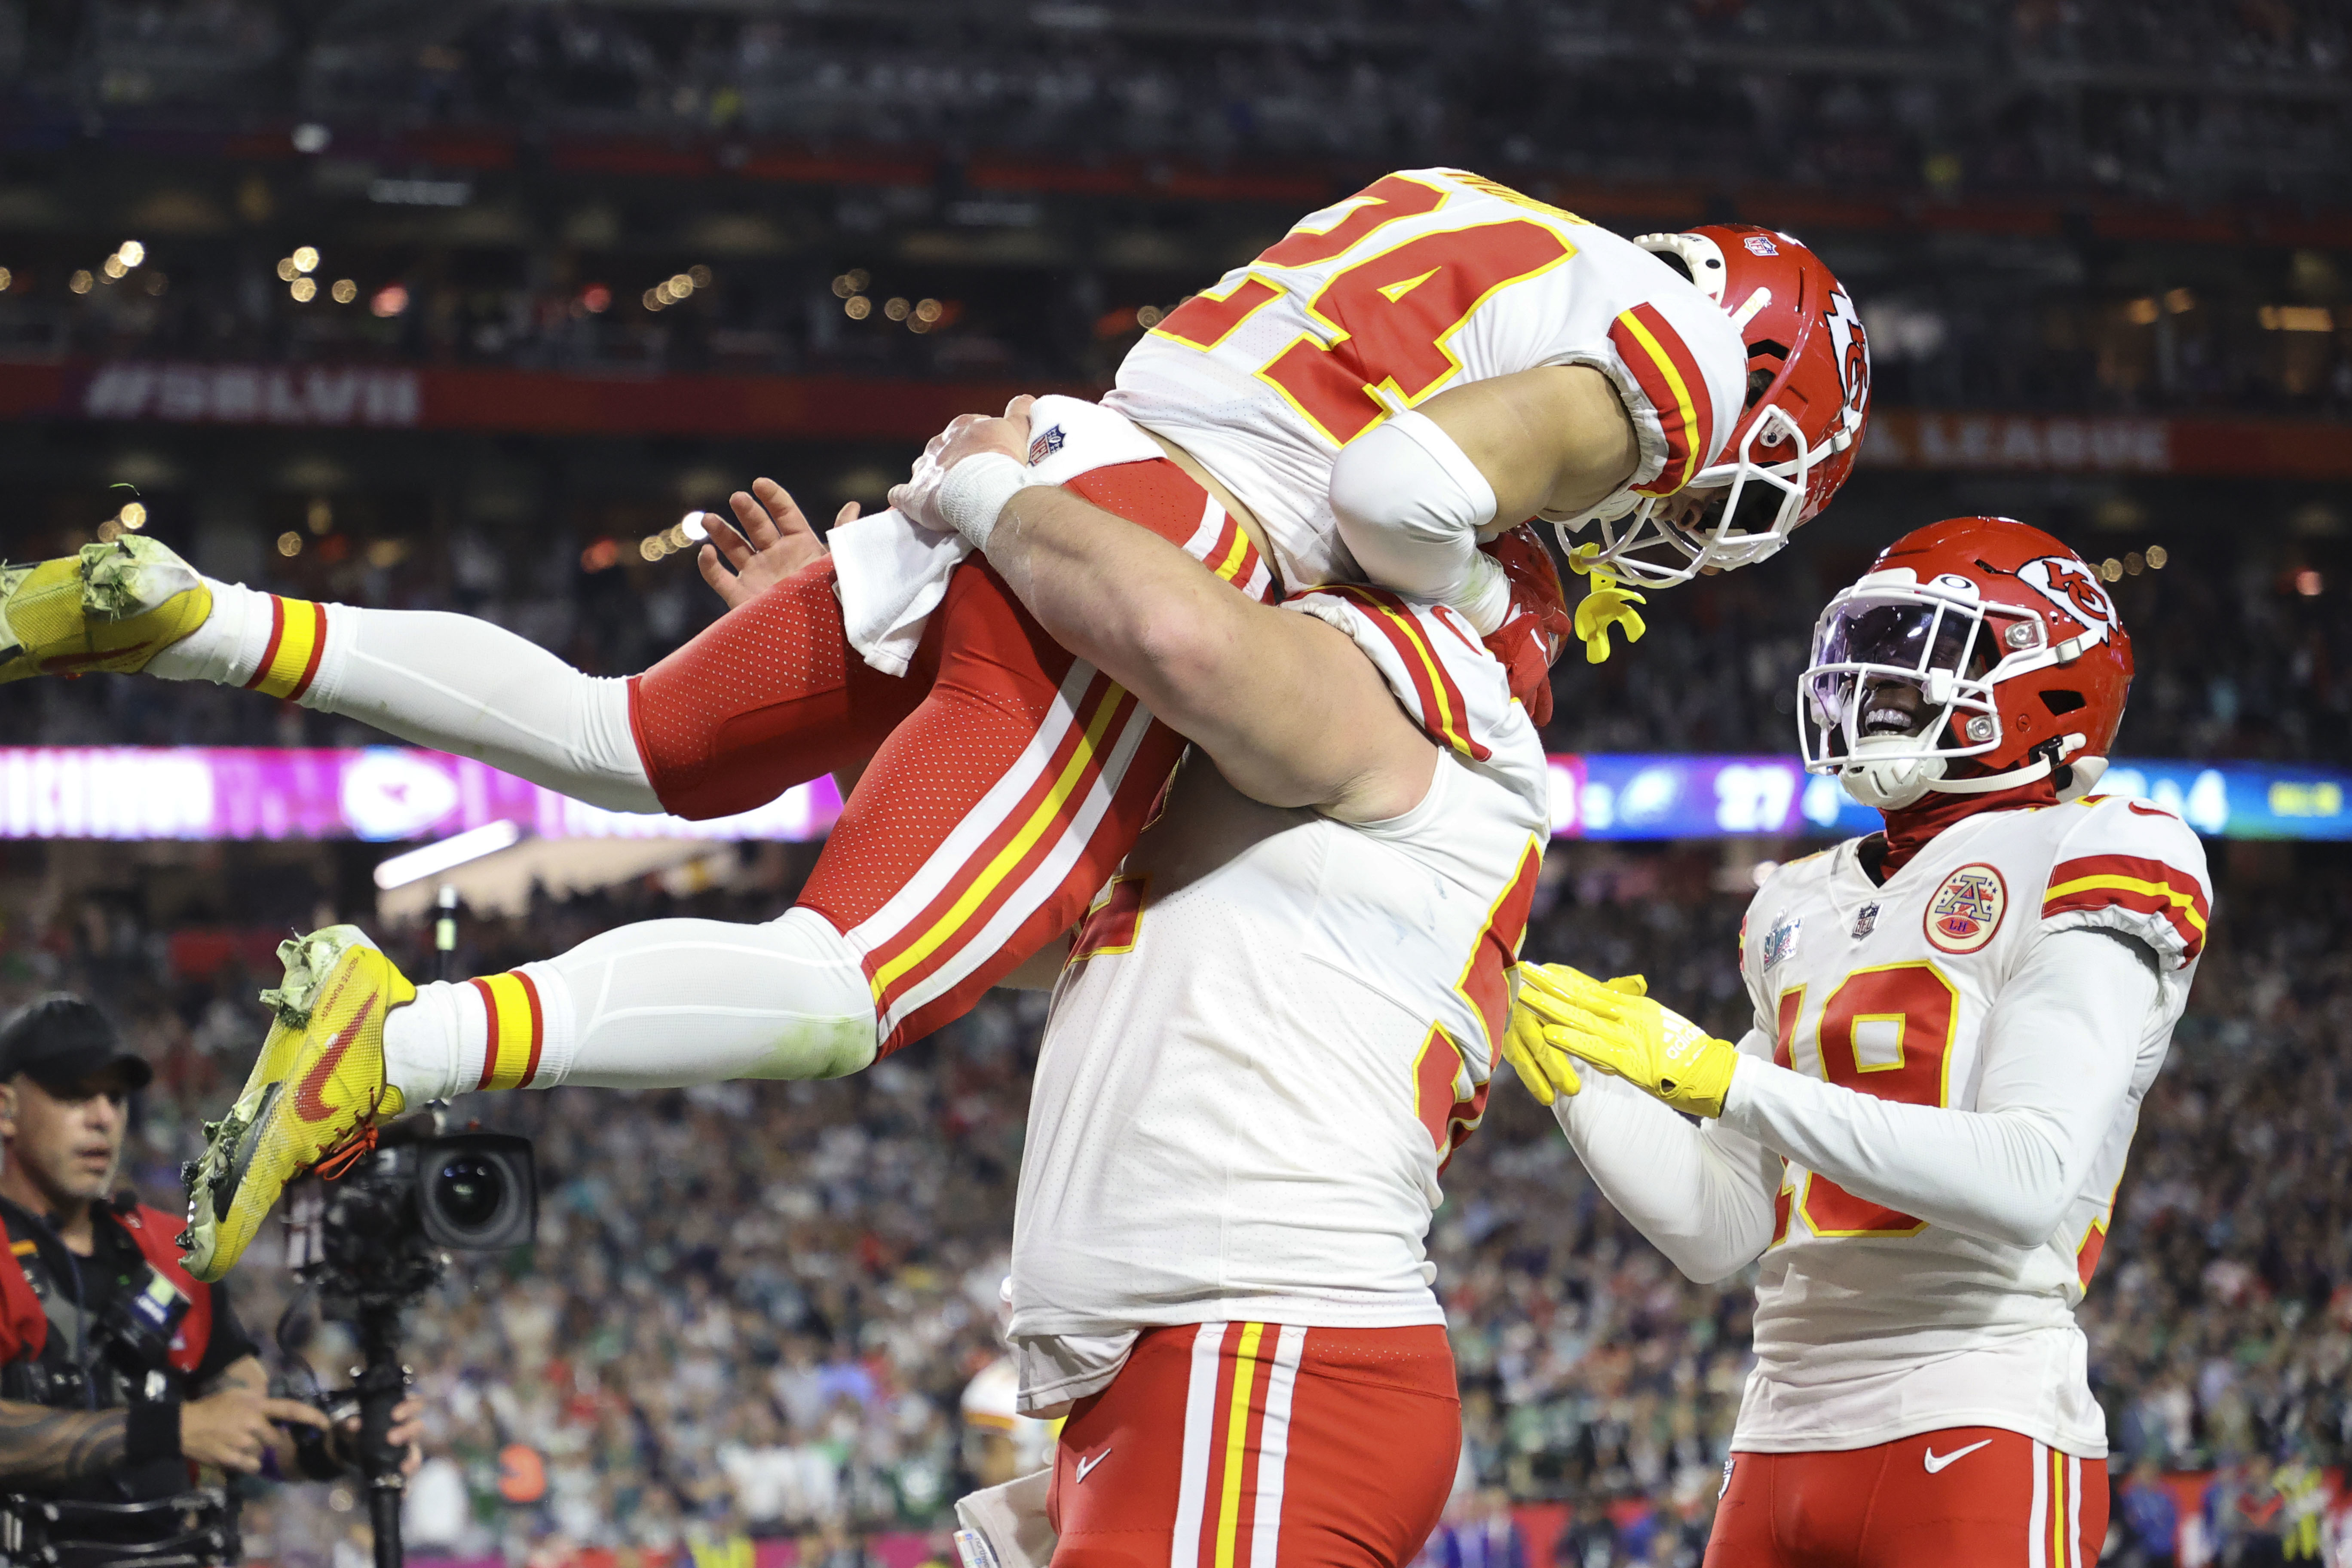 Super Bowl 2023 was a masterful performance by Chiefs offensive line